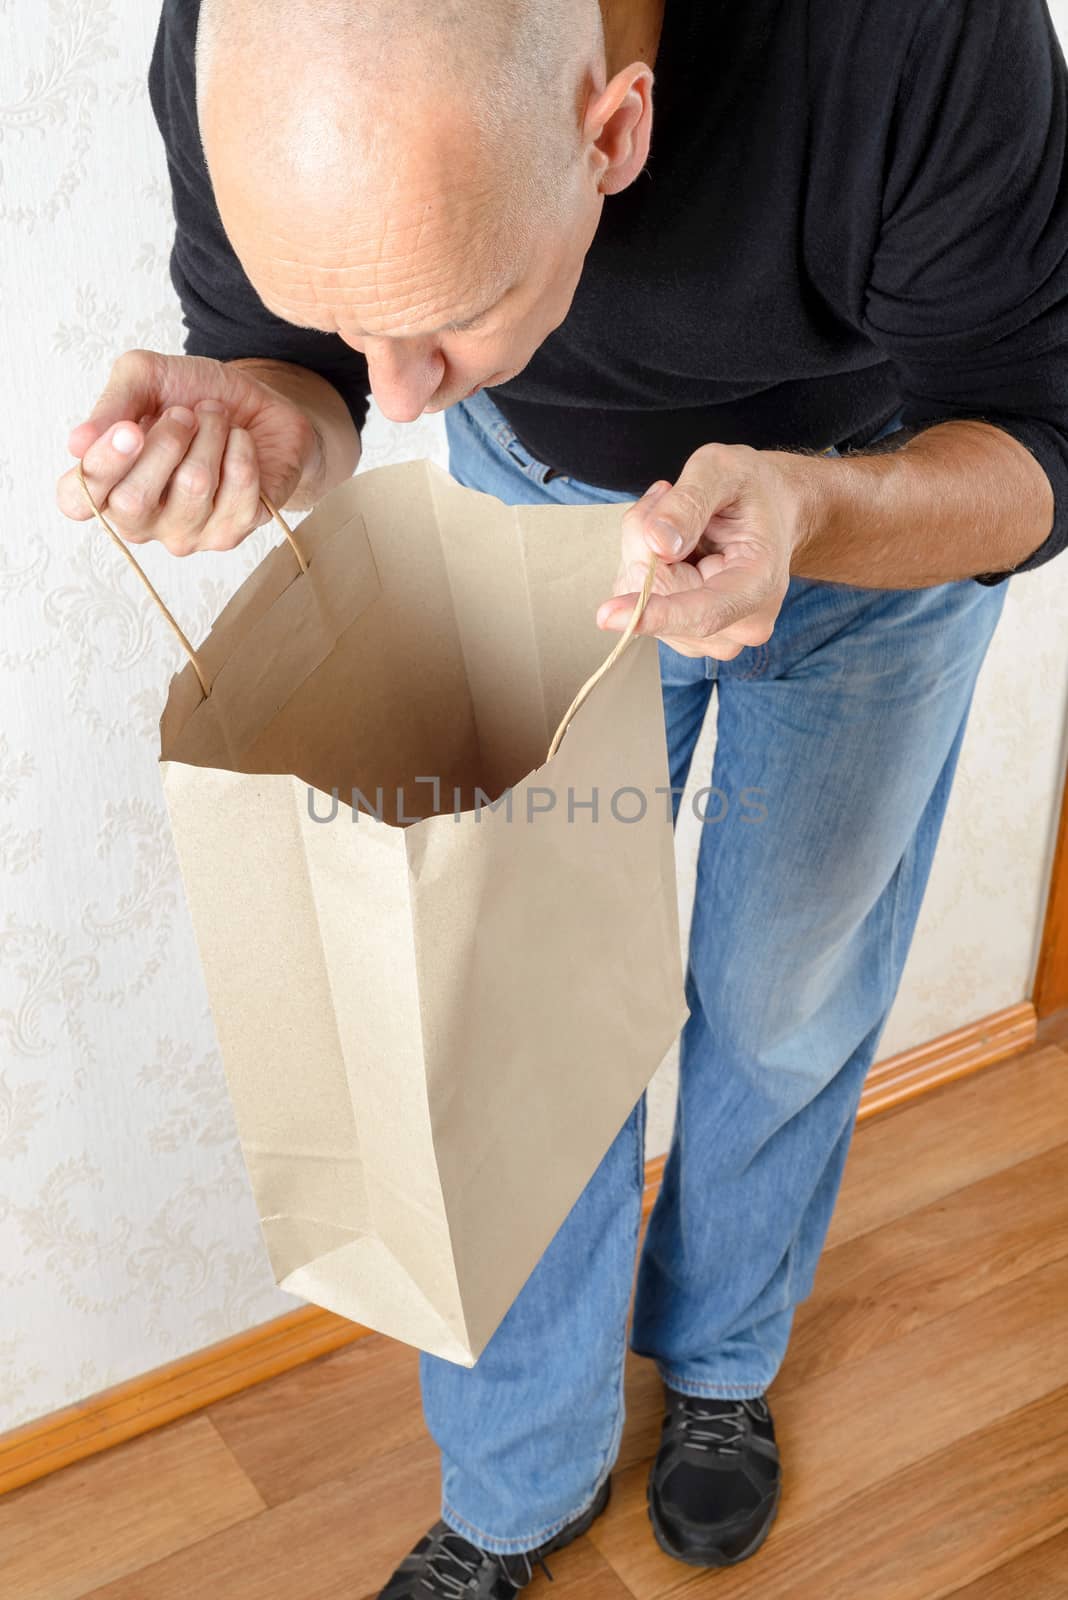 A man in blue jeans and black sweatshirt is looking inside a brown paper bag